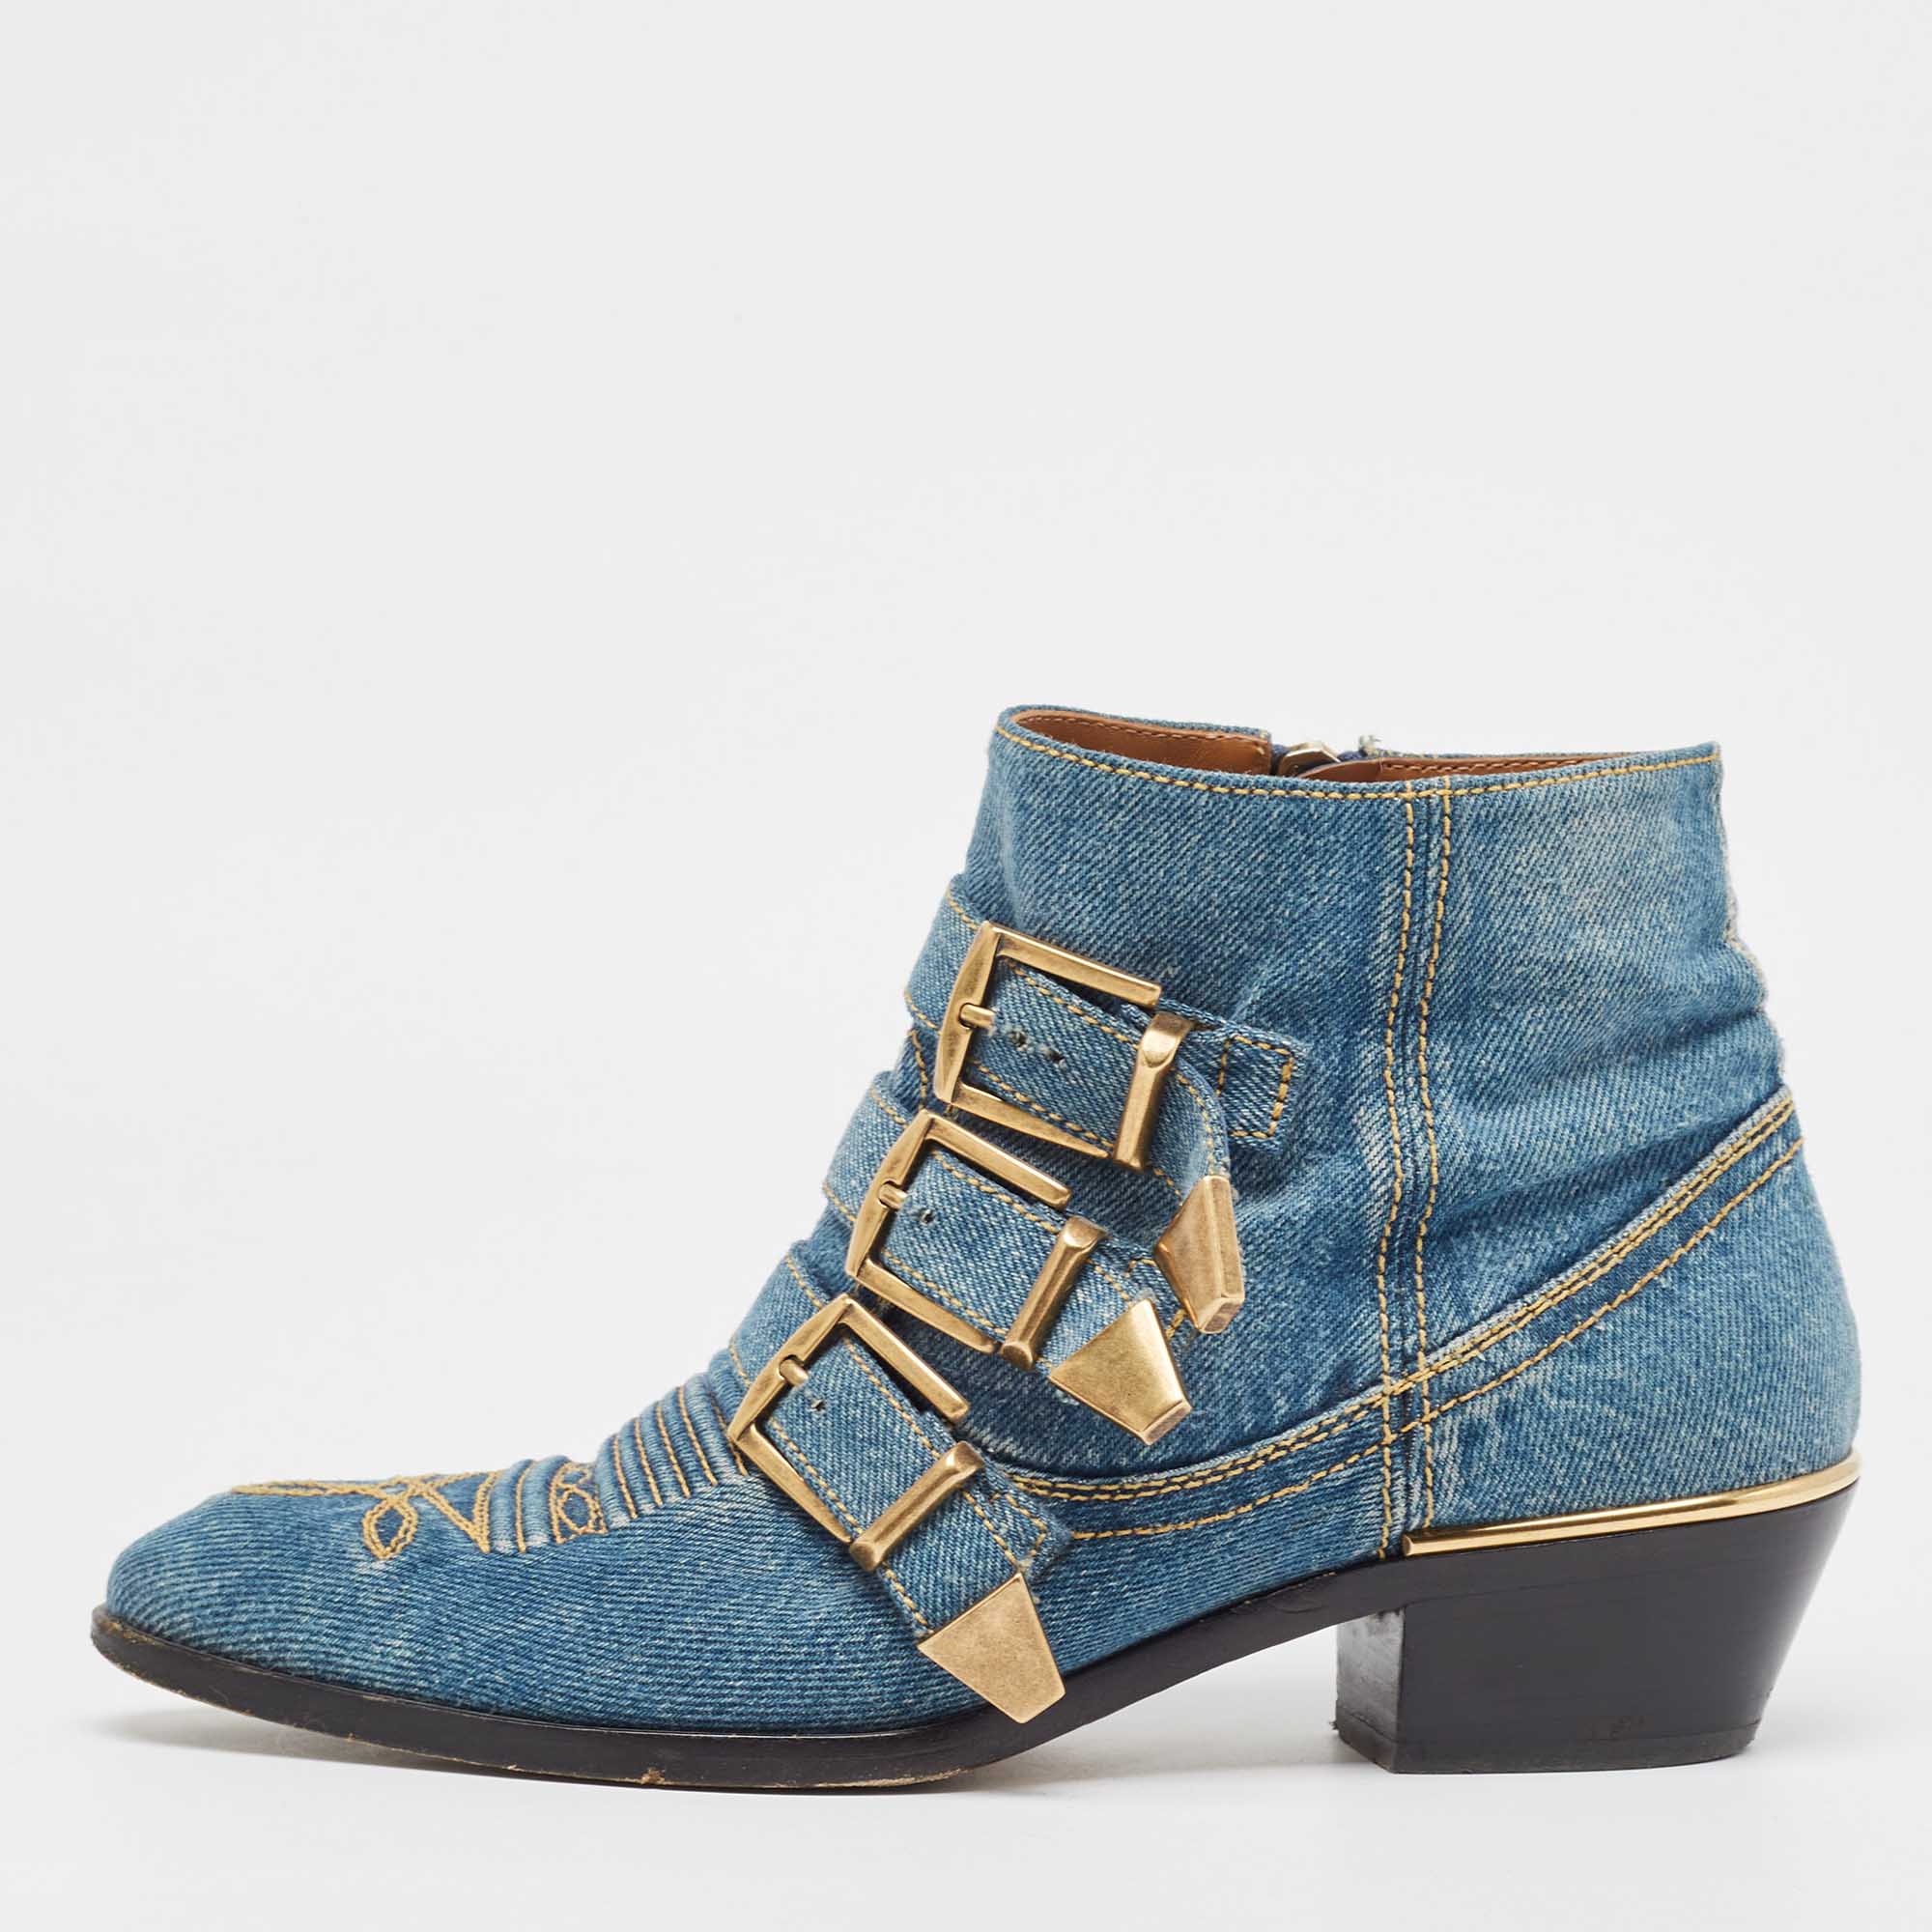 Chloe blue denim embroidered western boots size 37.5